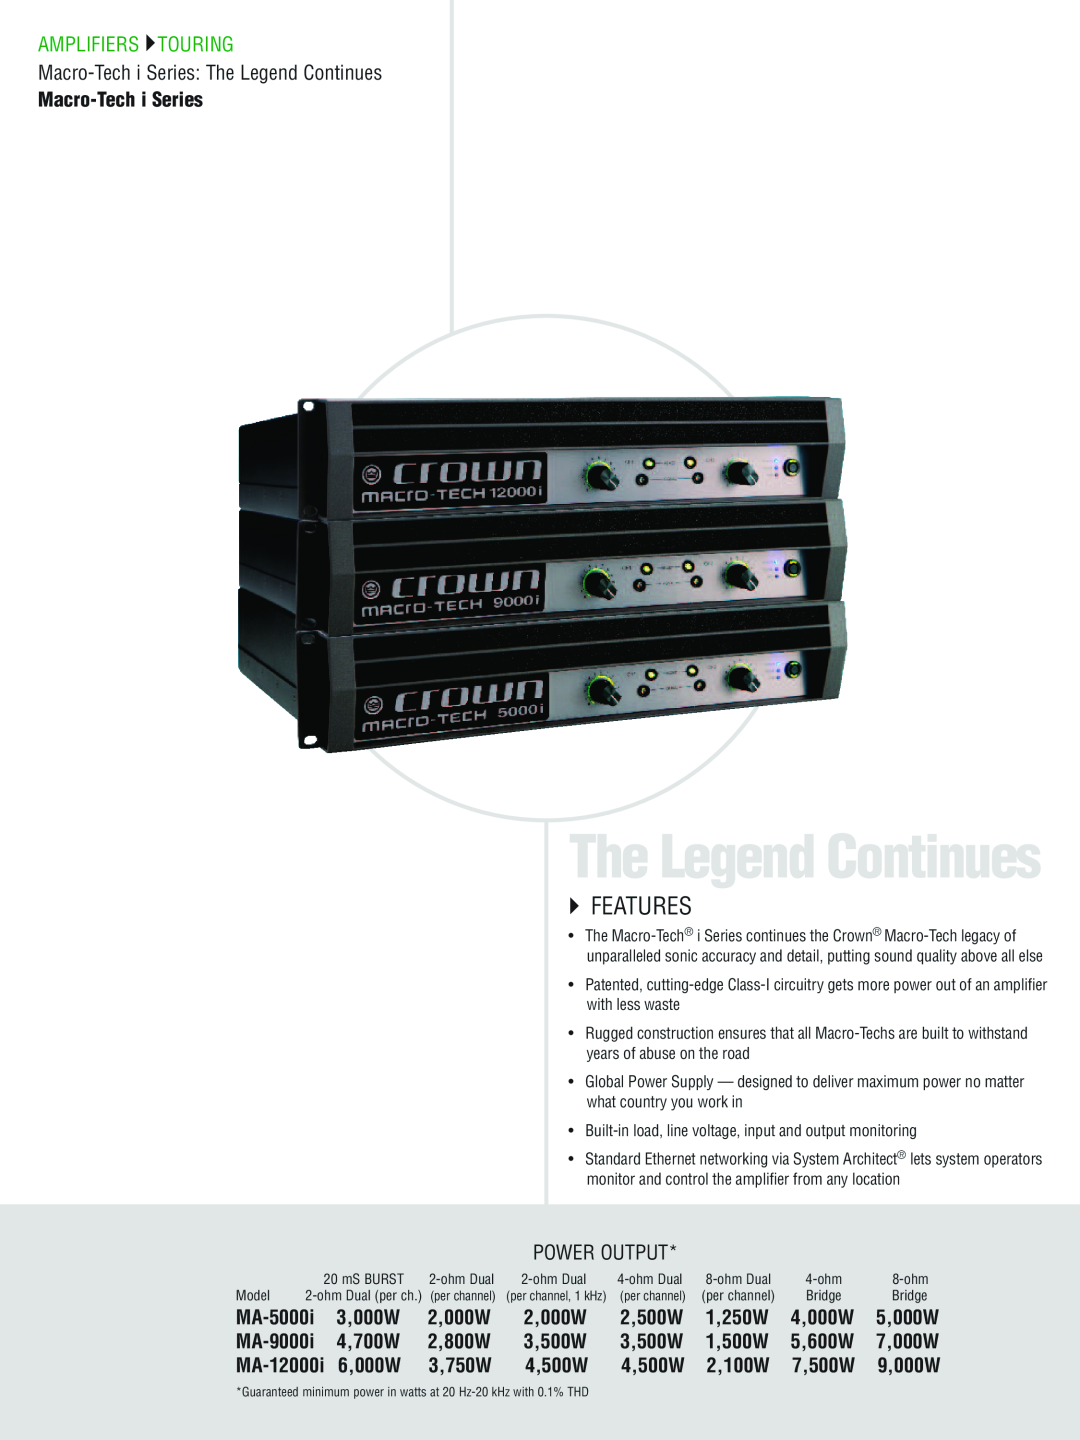 Crown CTS 1200, CTS 3000, CTS 2000, CTS 600 manual The Legend Continues, `` Features, Amplifiers Touring 